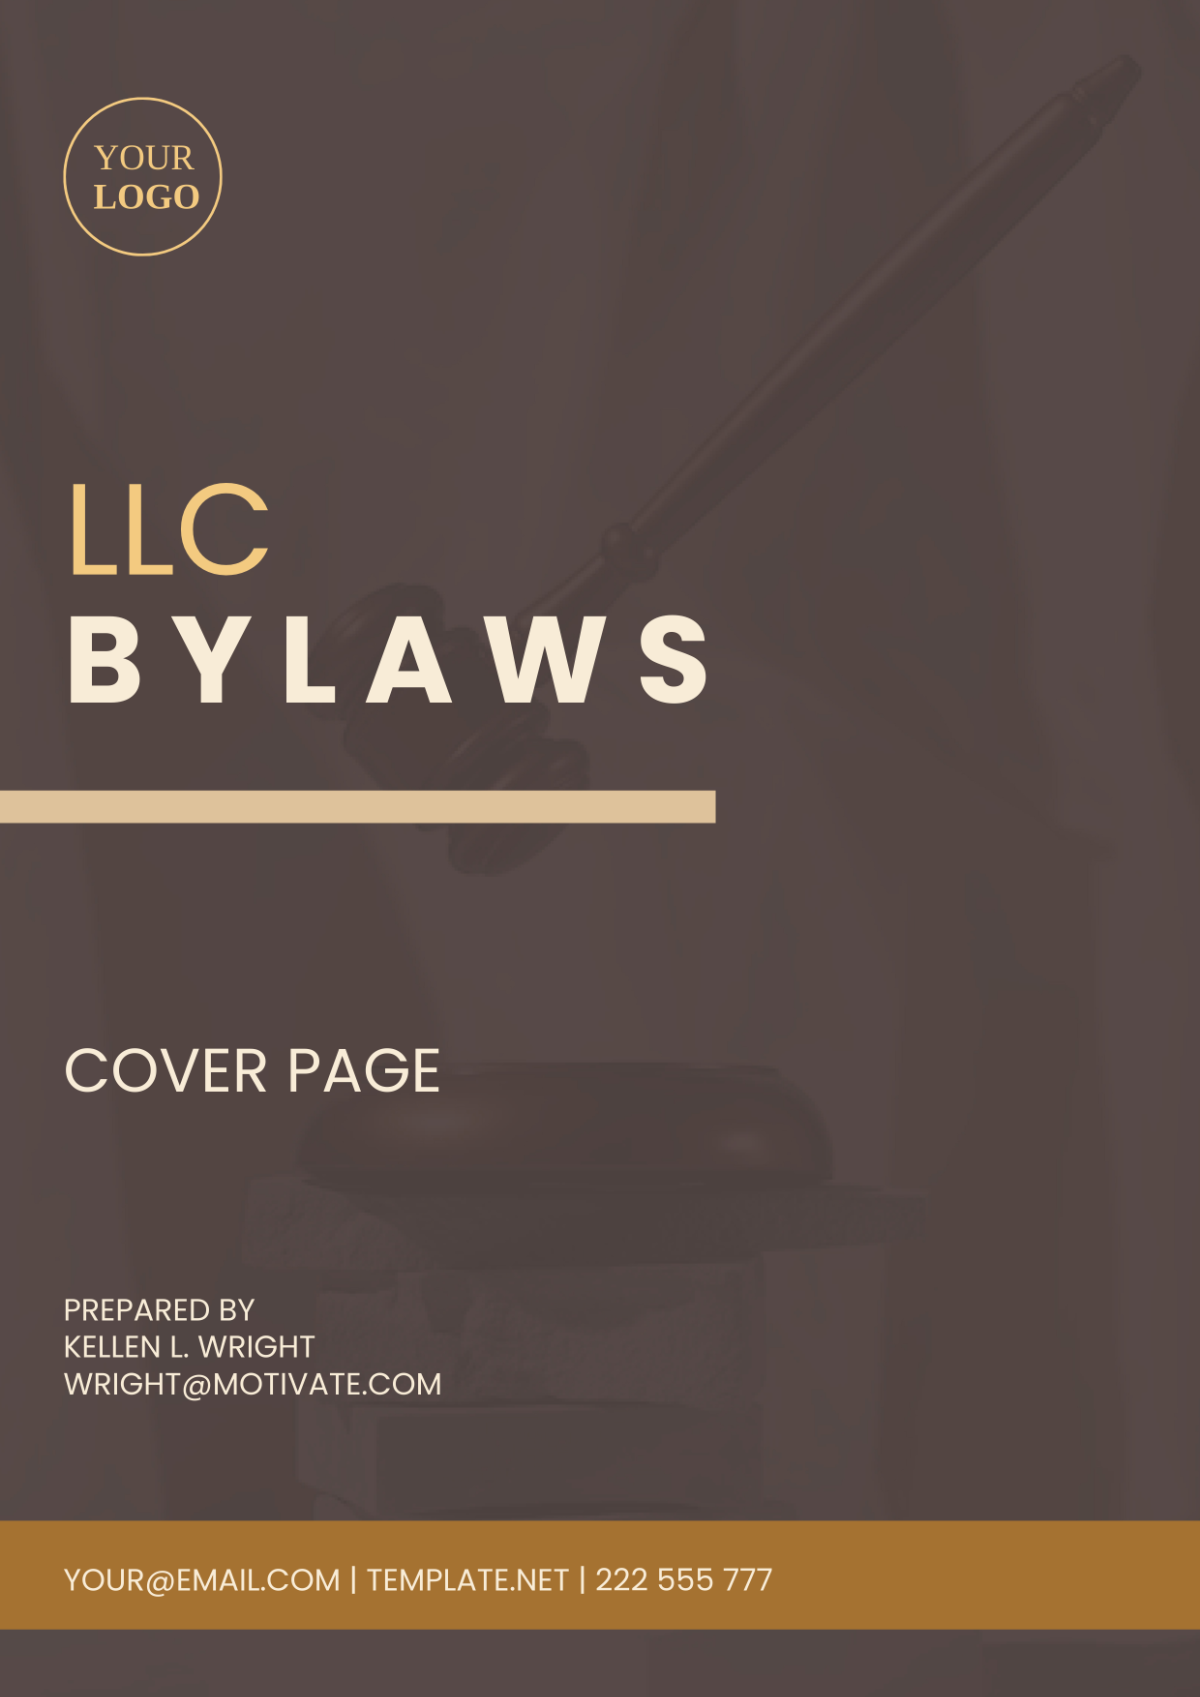 LLC Bylaws Cover Page Template